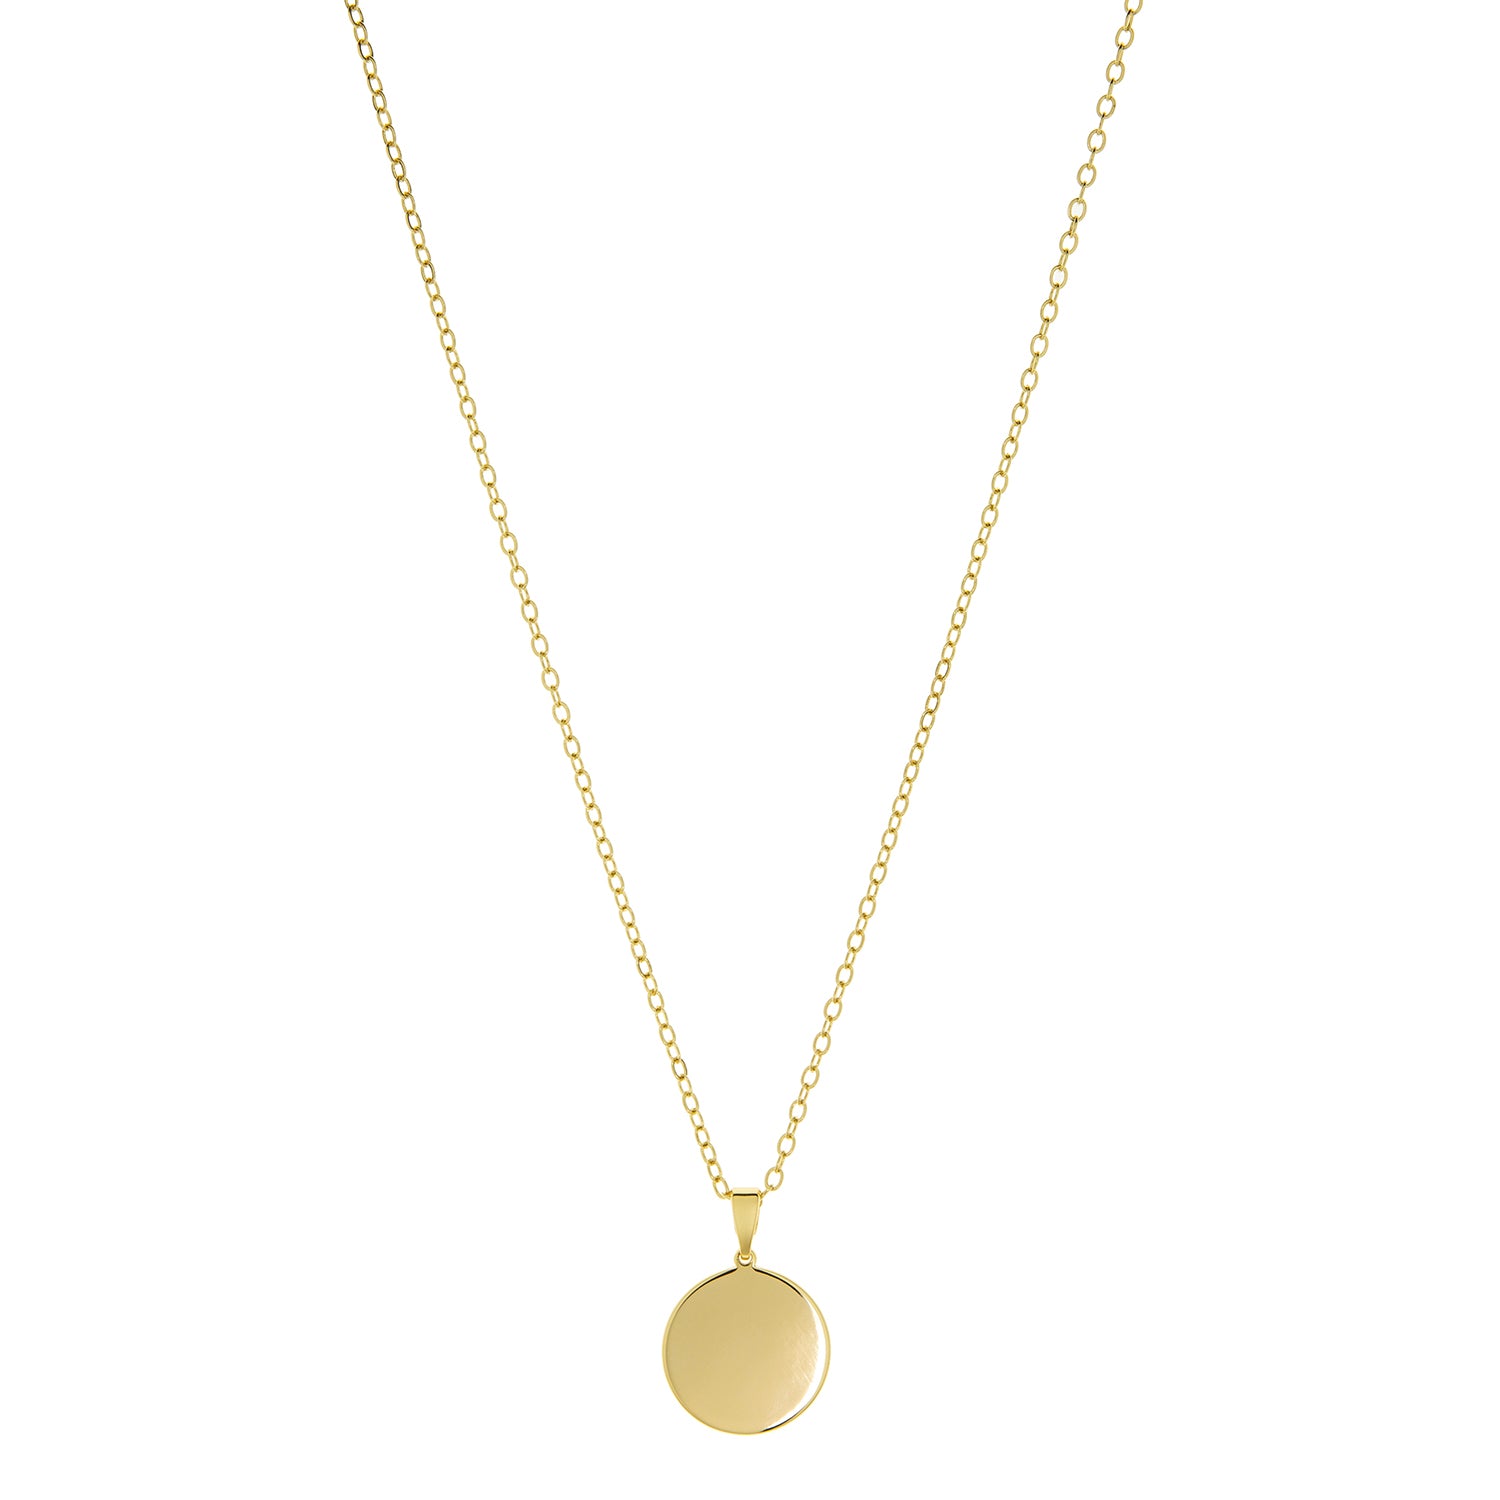 Marlyn Schiff Goldtone Disc Pendant Necklace